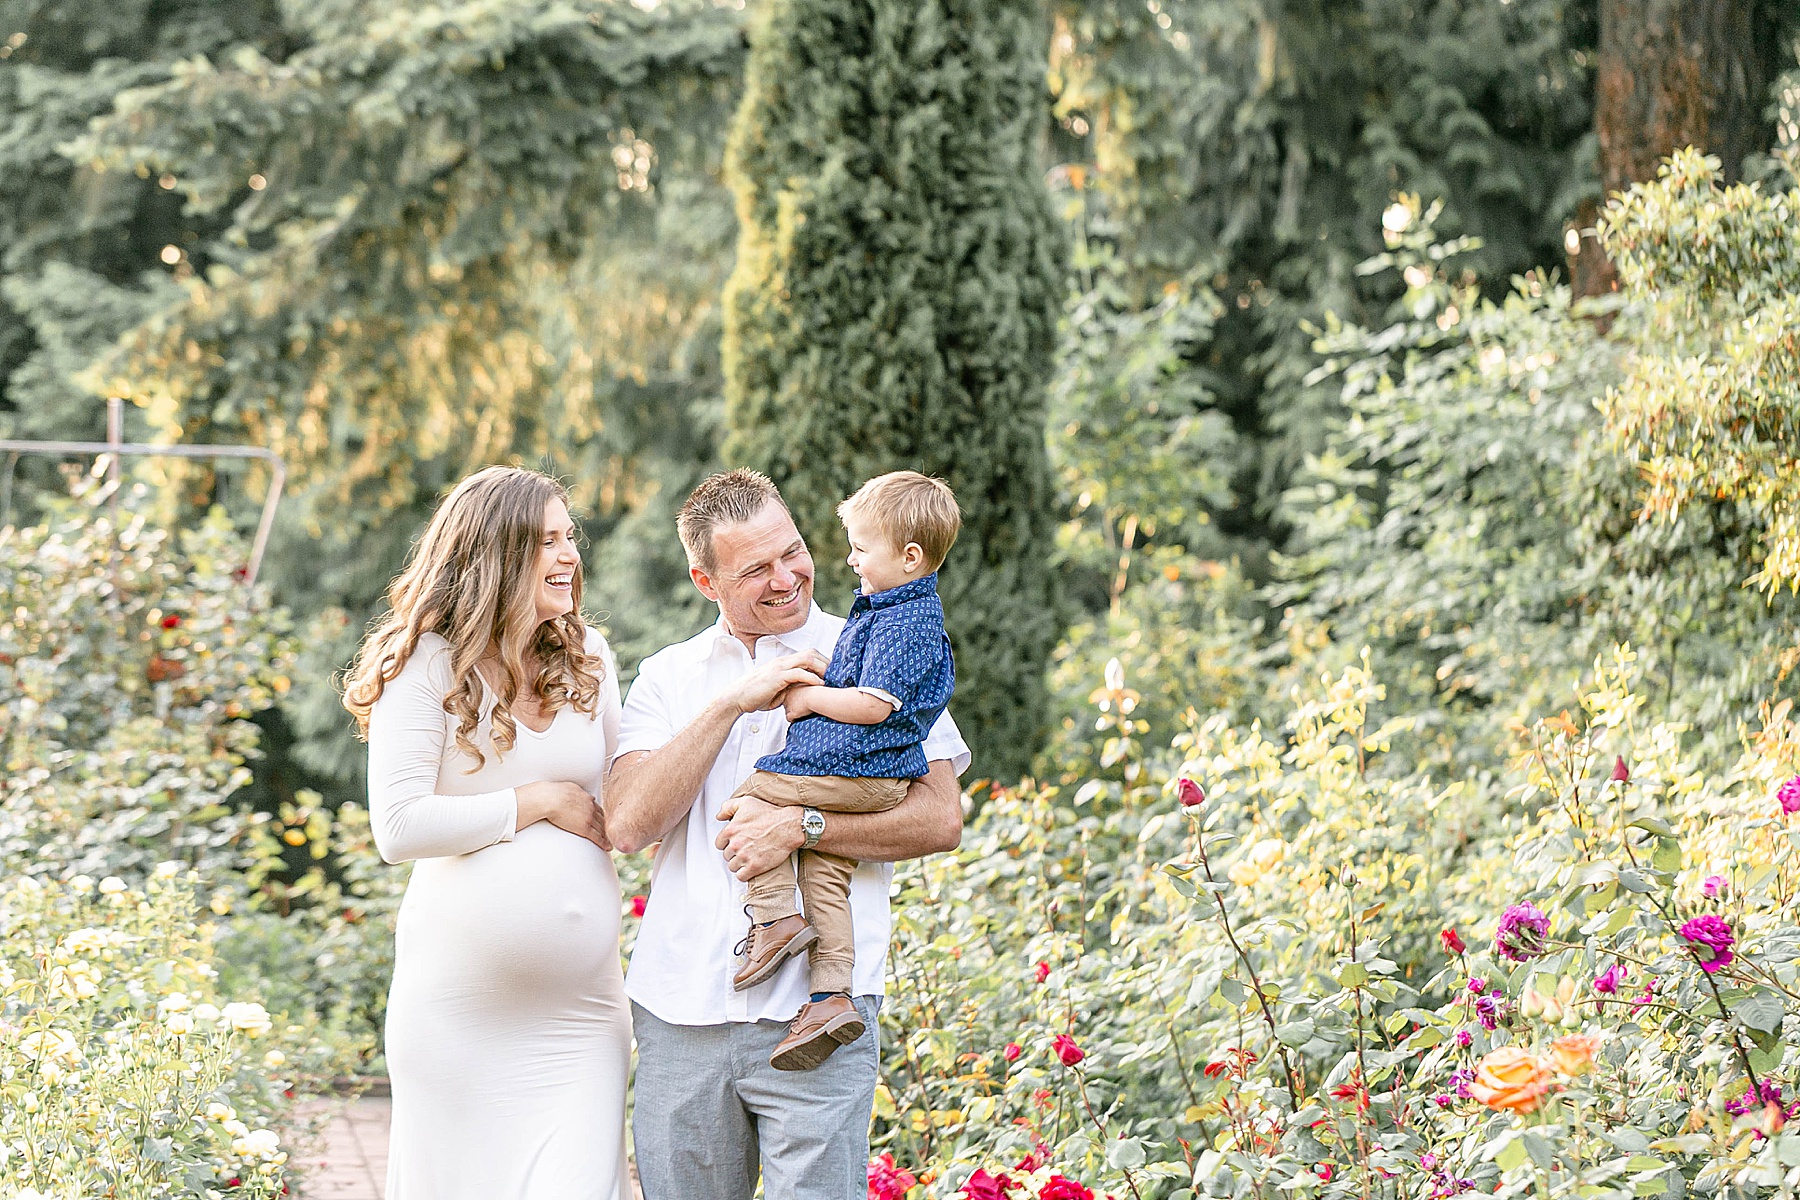 pregnant woman in white dress with man in white shirt & grey pants holding little boy in blue shirt and khaki pants giggling together in the Portland International Rose Test Gardens